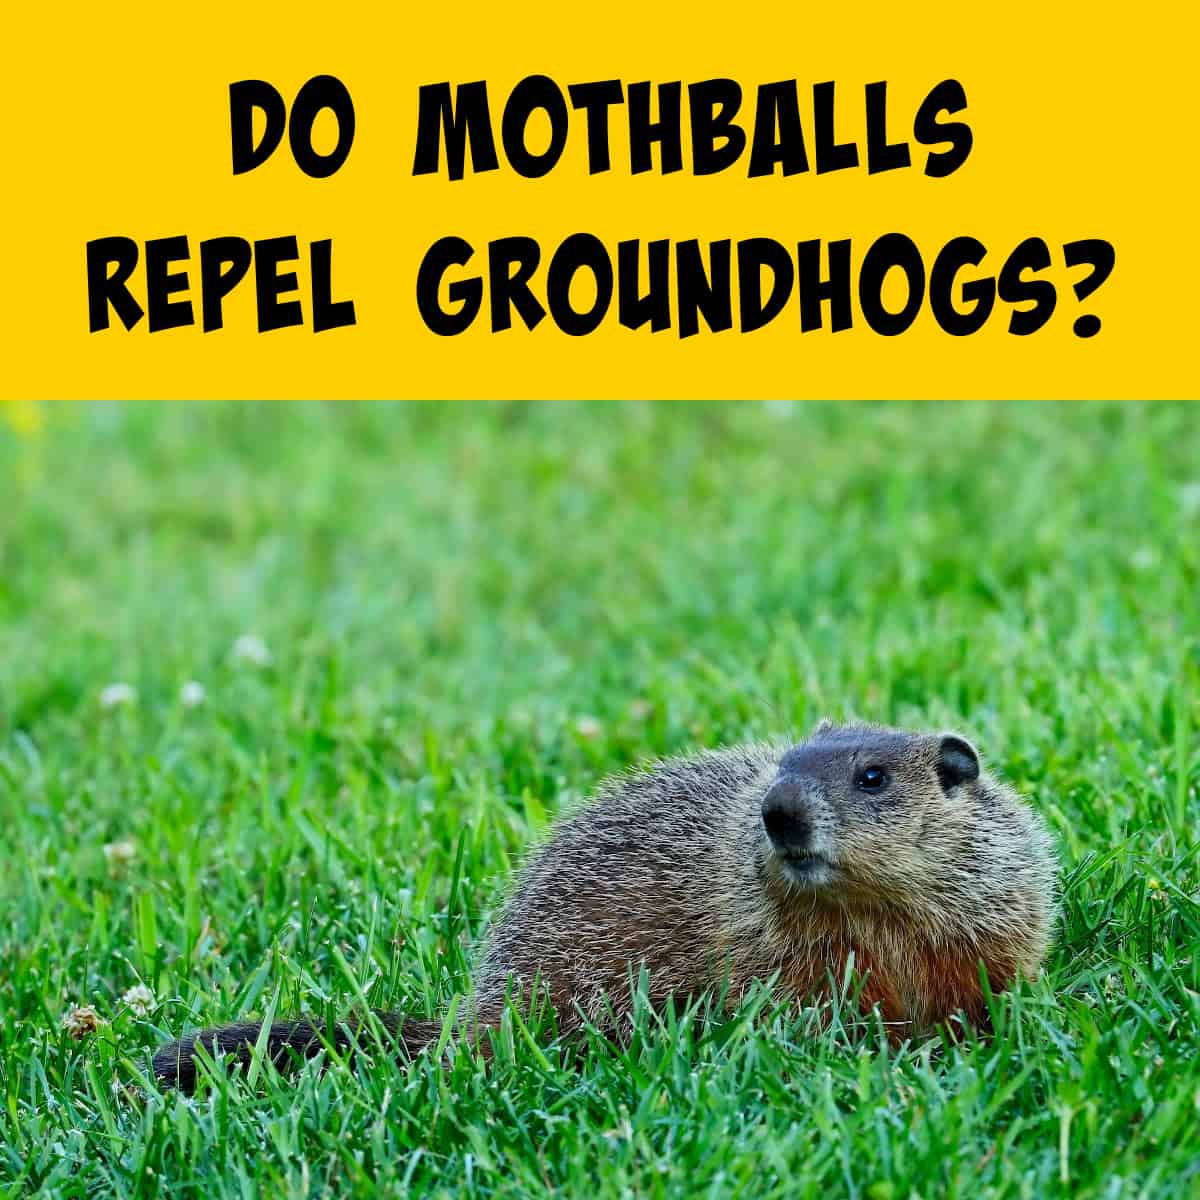 Picture of a groundhog in green grass